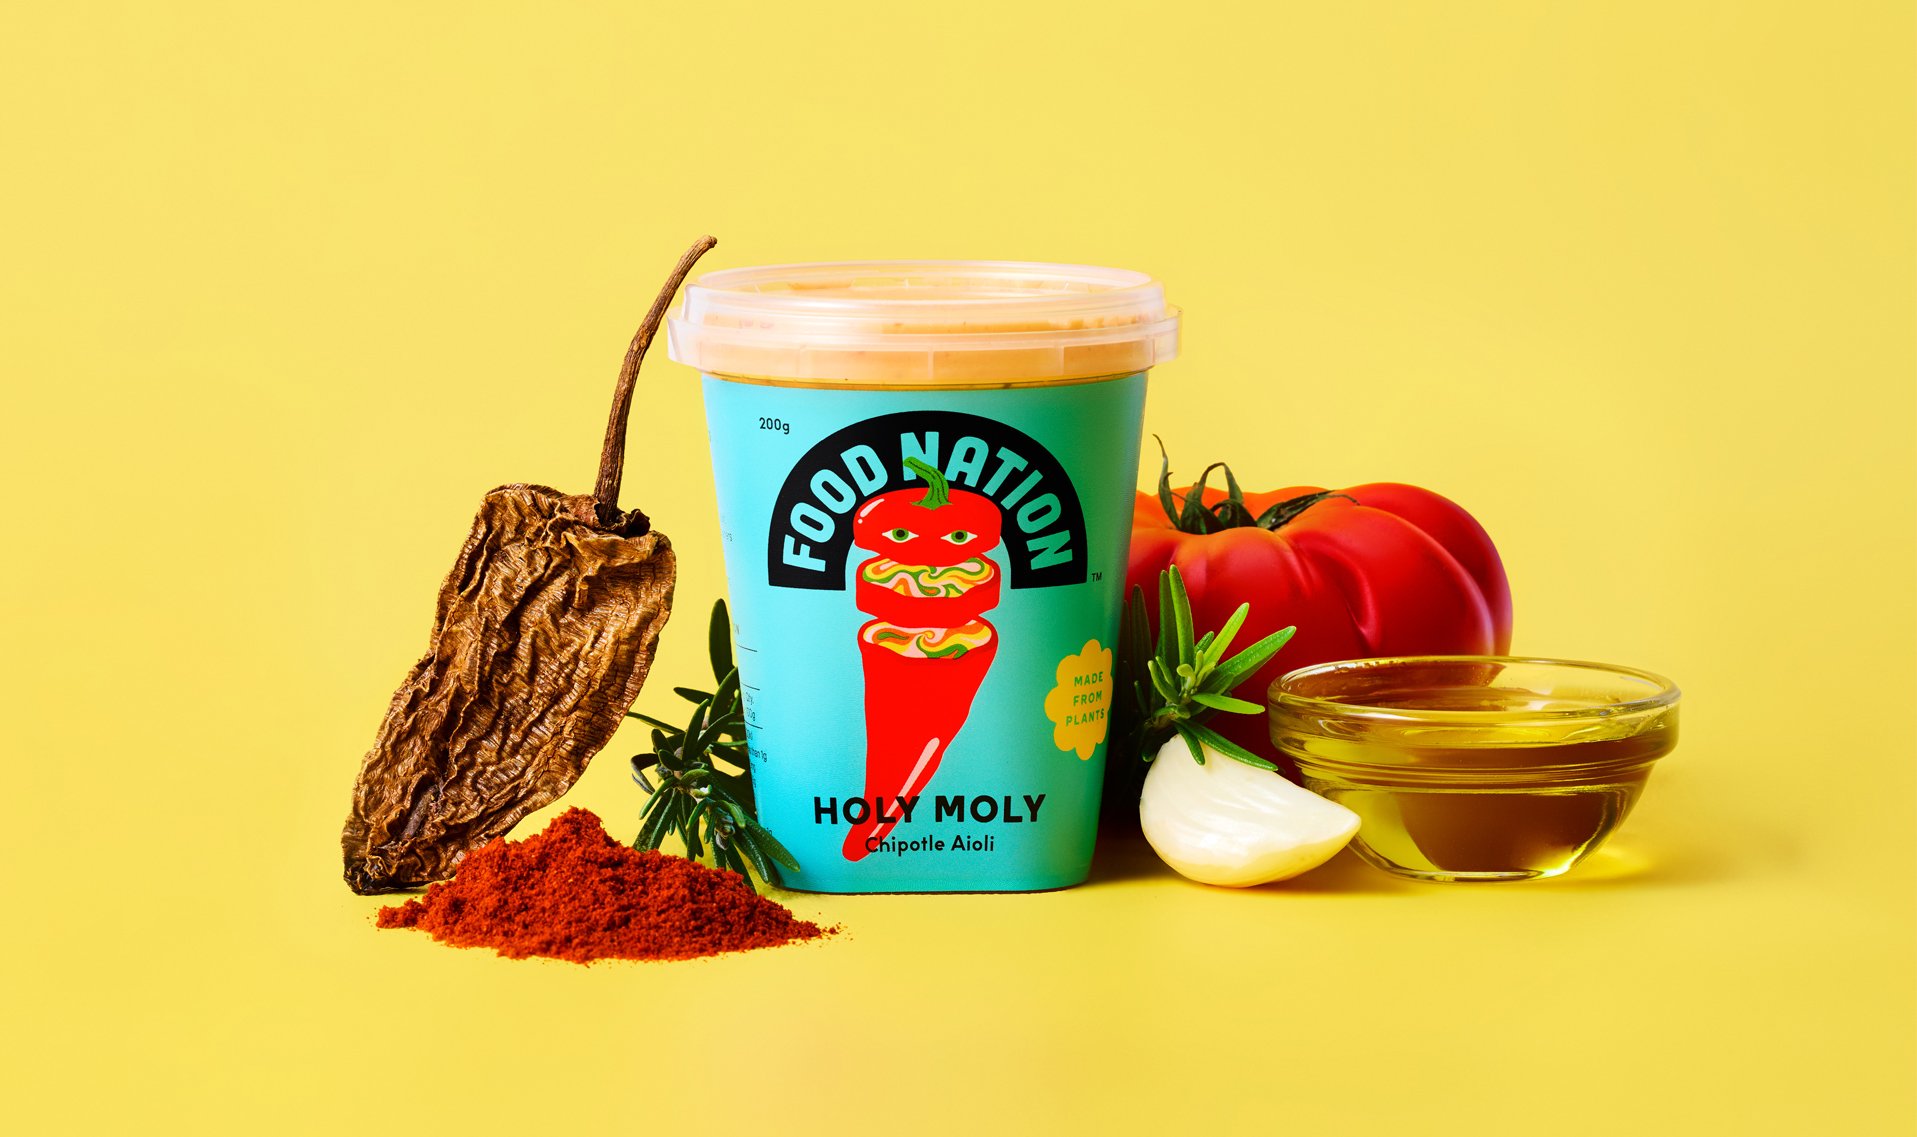 Visual identity and packaging design by New Zealand studio Seachange for plant-based food brand Food Nation.